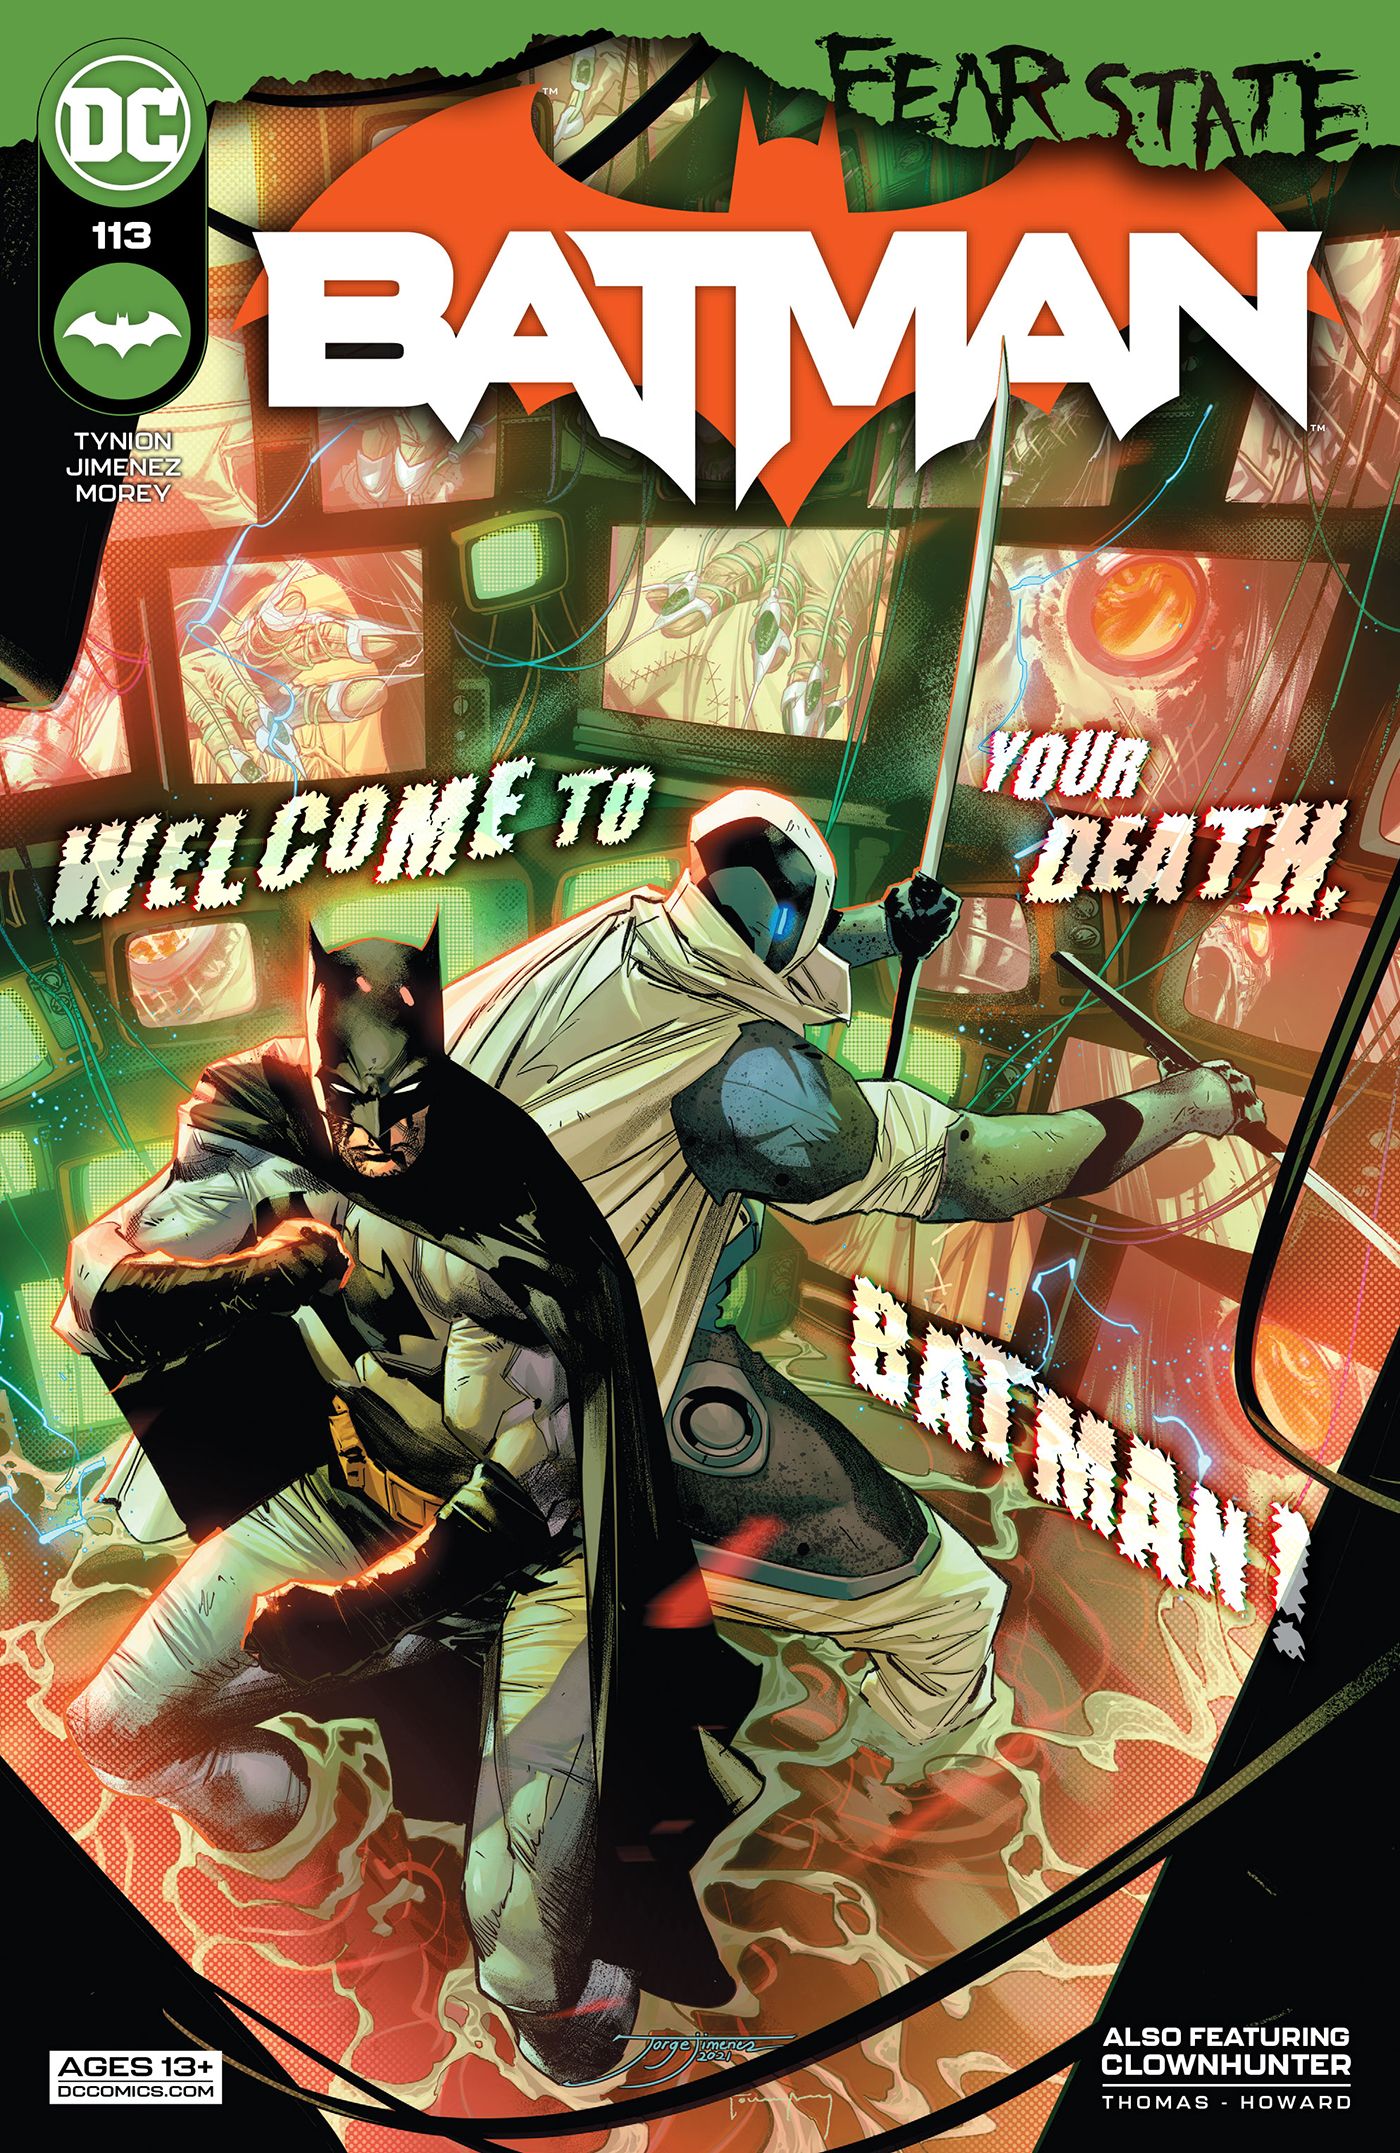 Batman and Ghost-Maker team up on the cover of Batman #113.